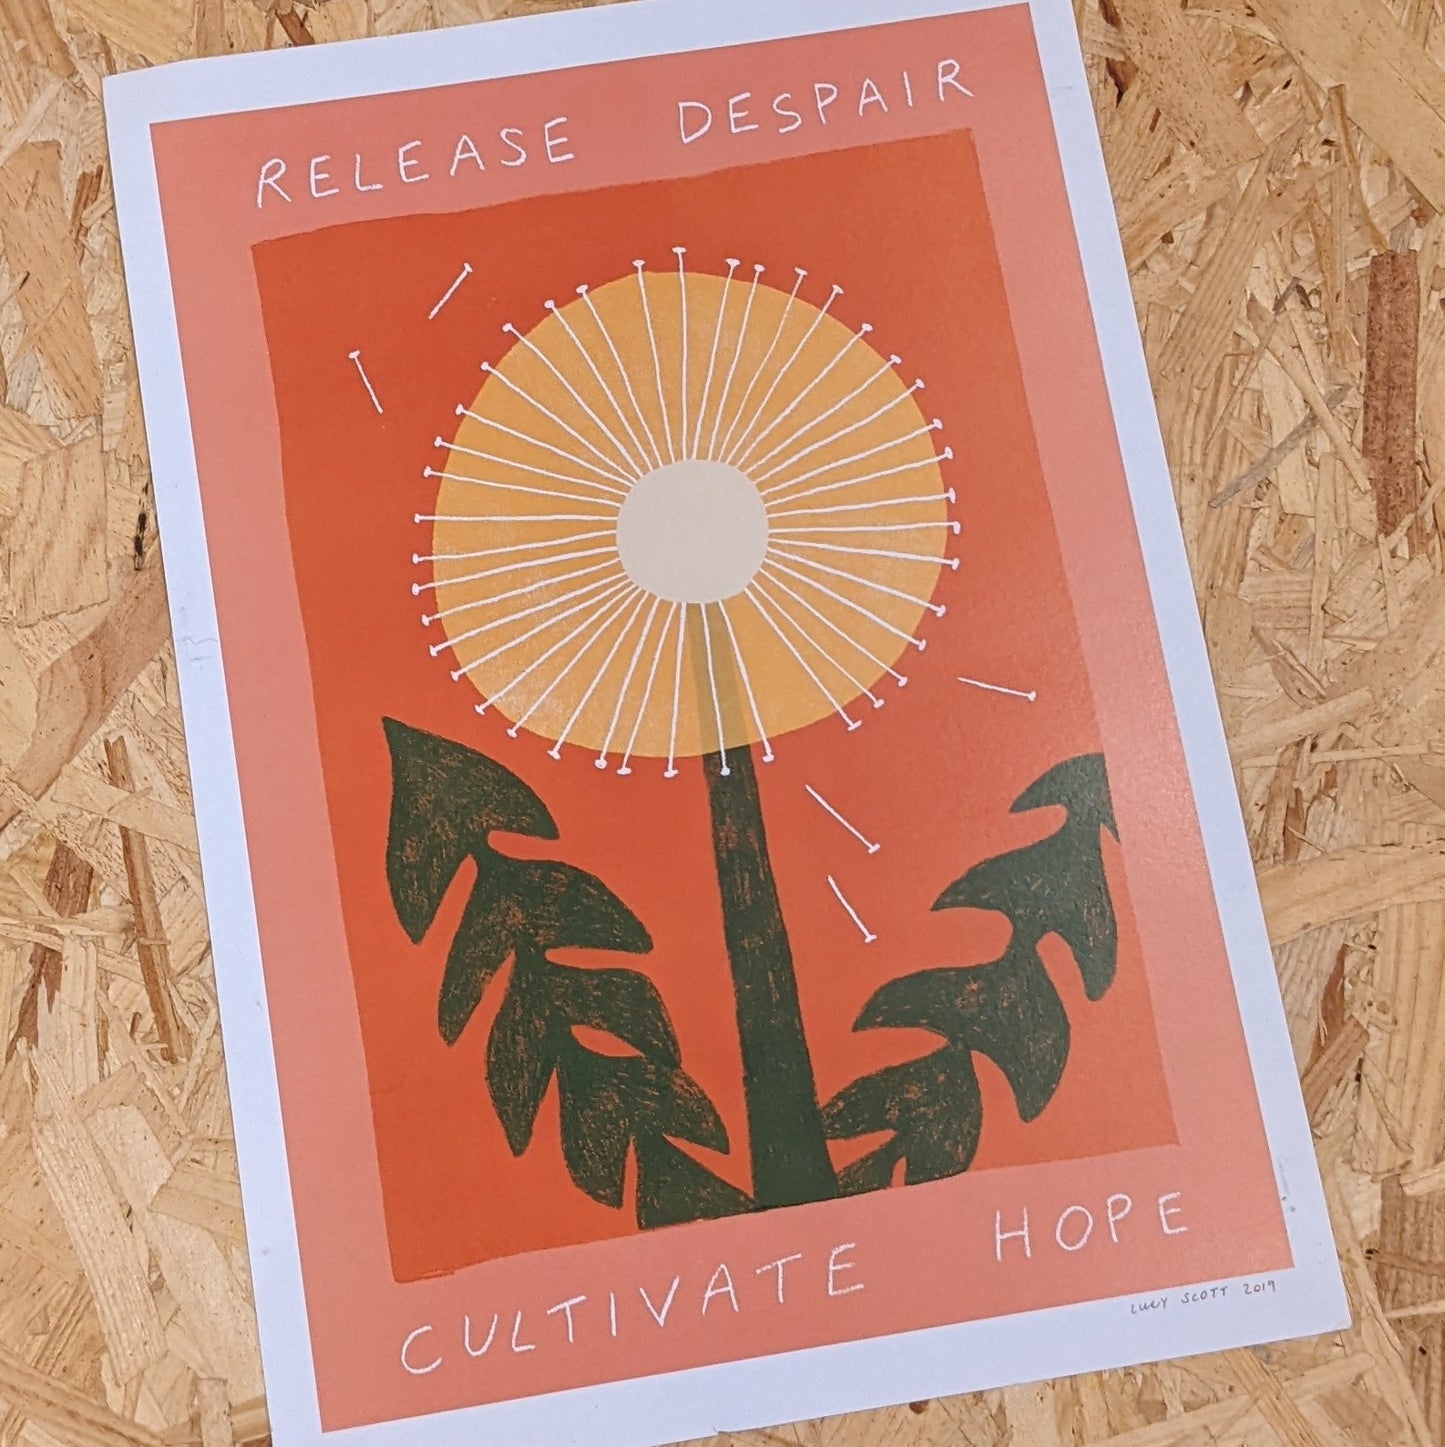 A3 Release despair and cultivate hope print